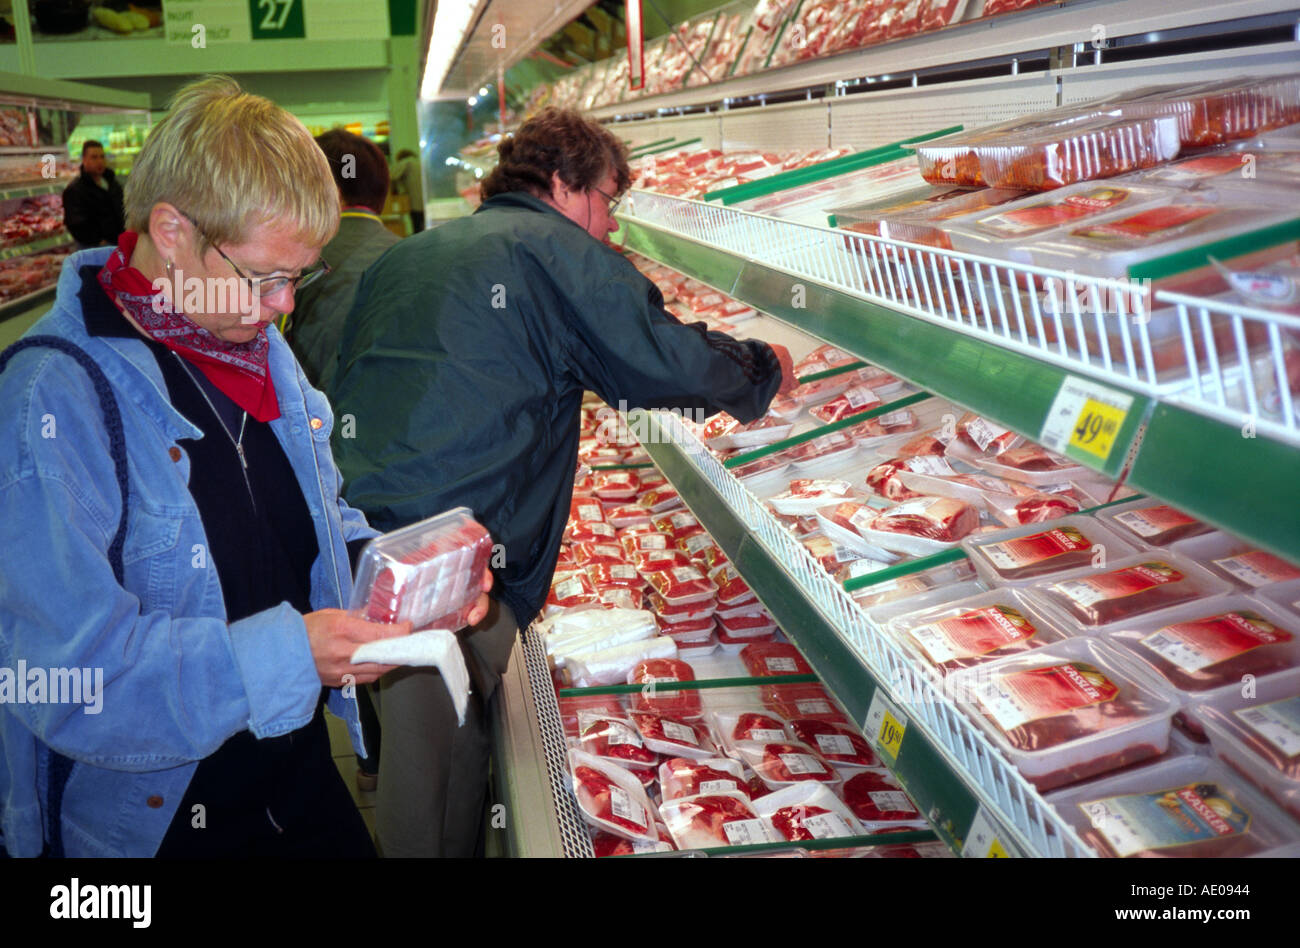 controlling meat in supermarket Stock Photo